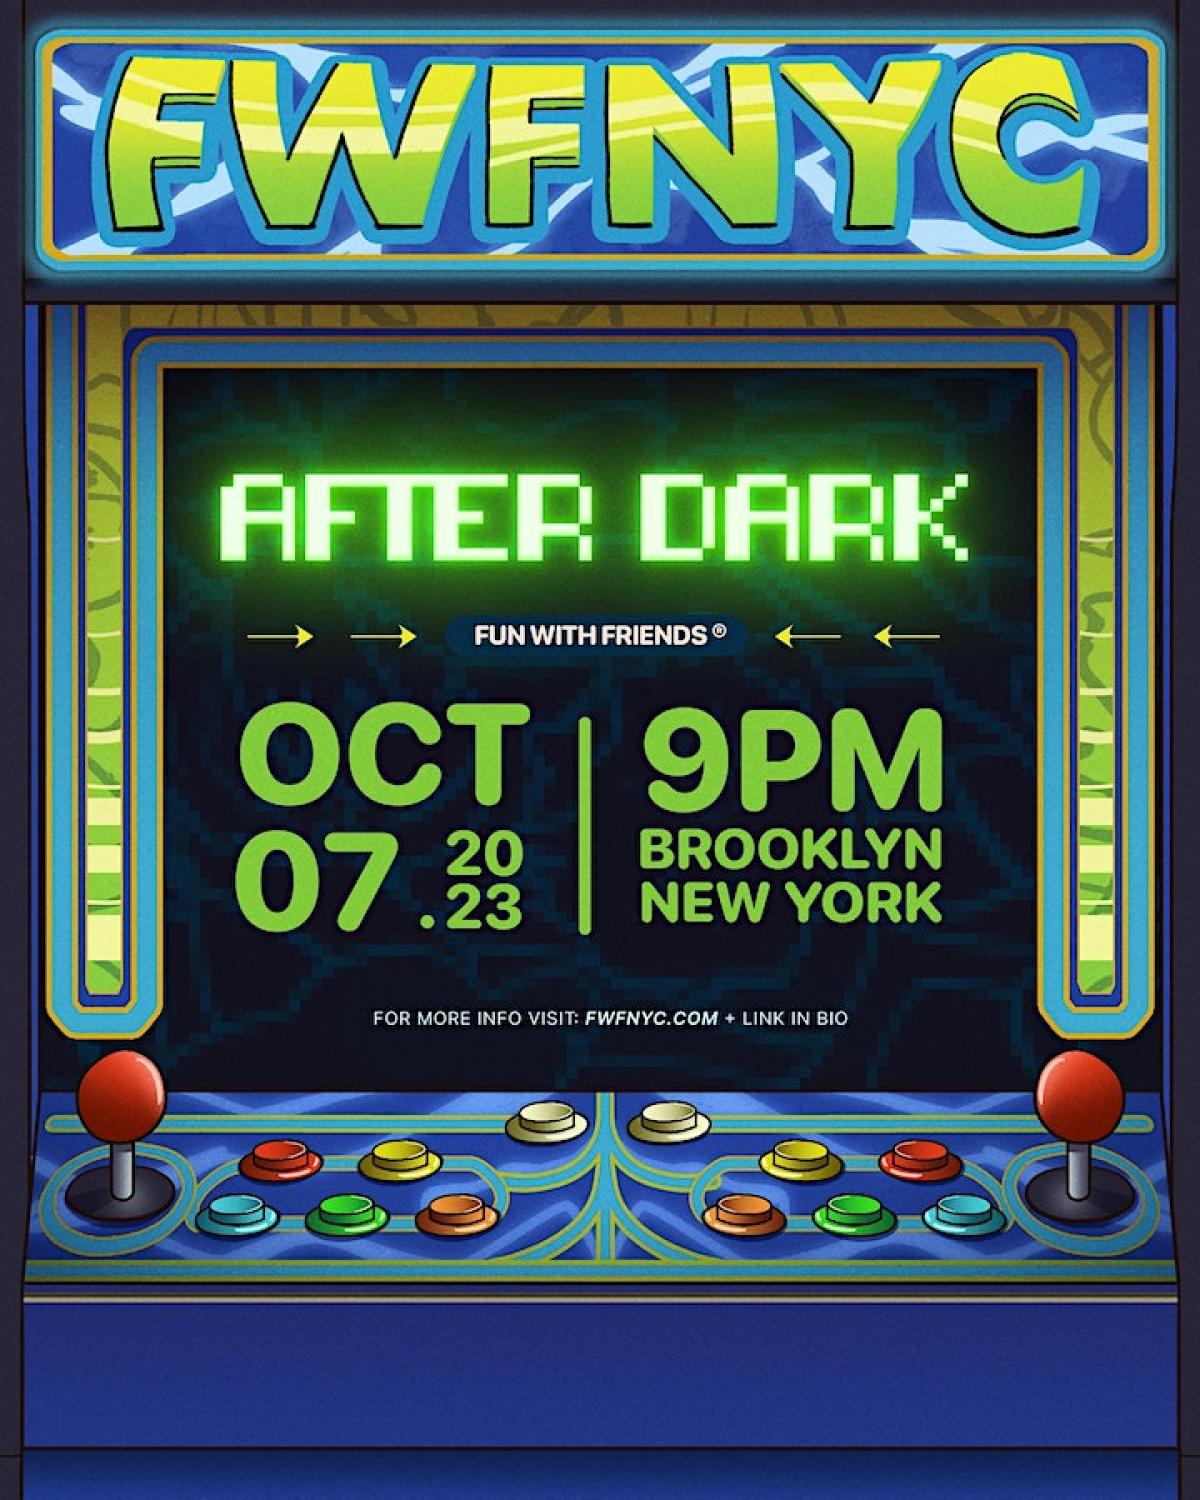 Fun With Friends After Dark flyer or graphic.